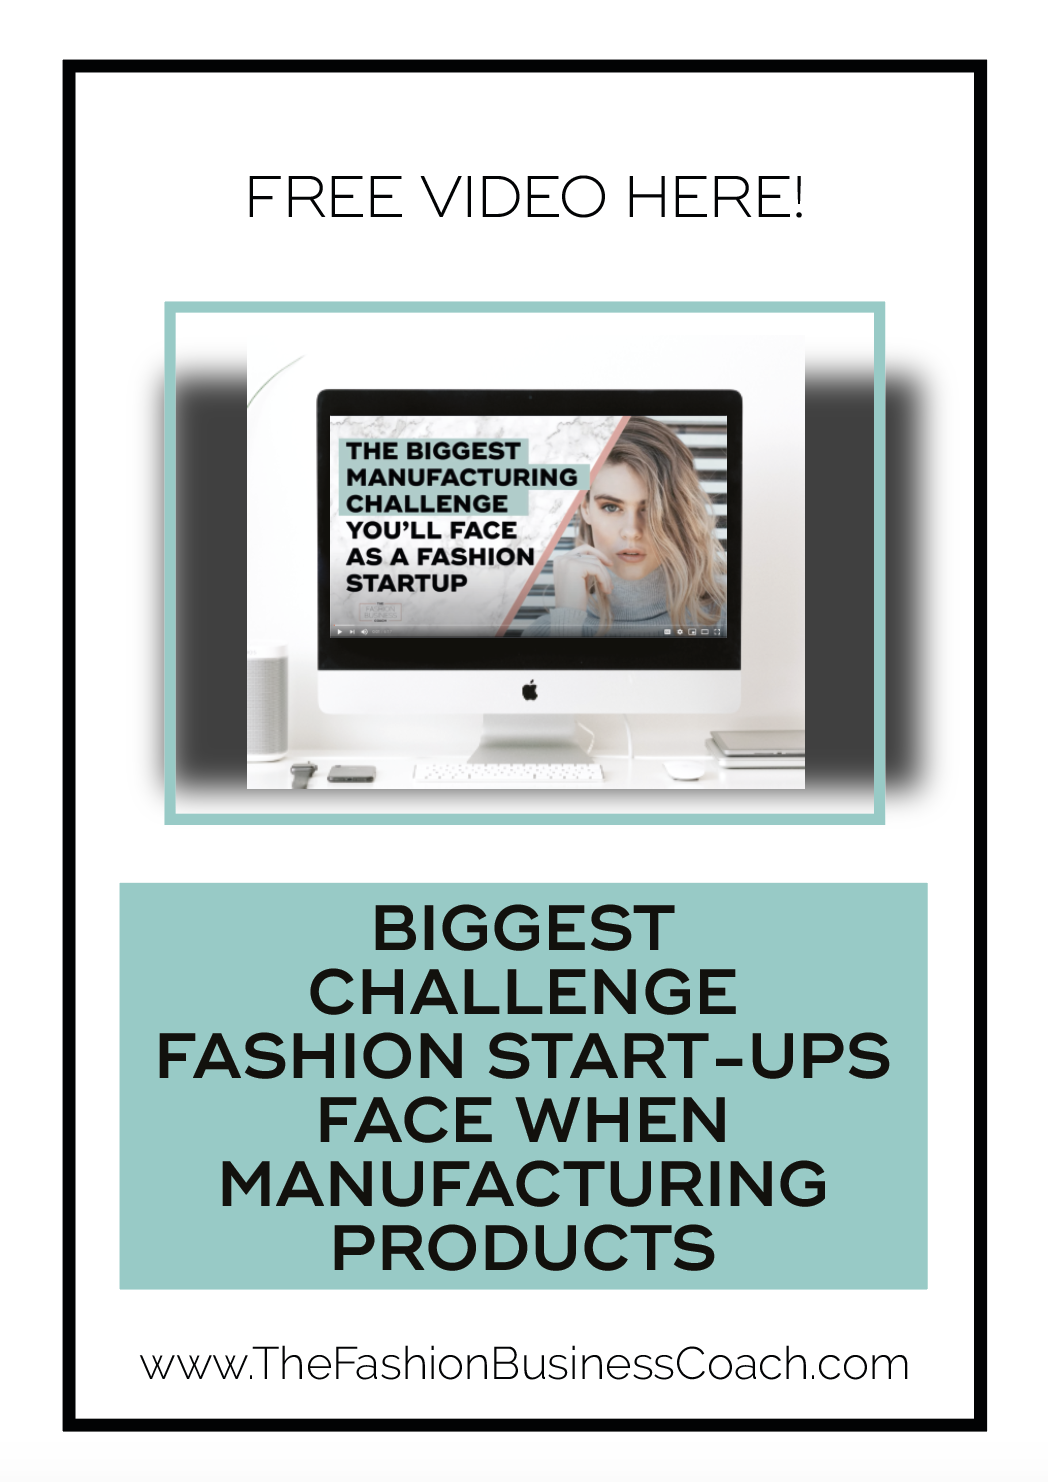 Biggest challenge Fashion Start-ups face when manufacturing products 3.png